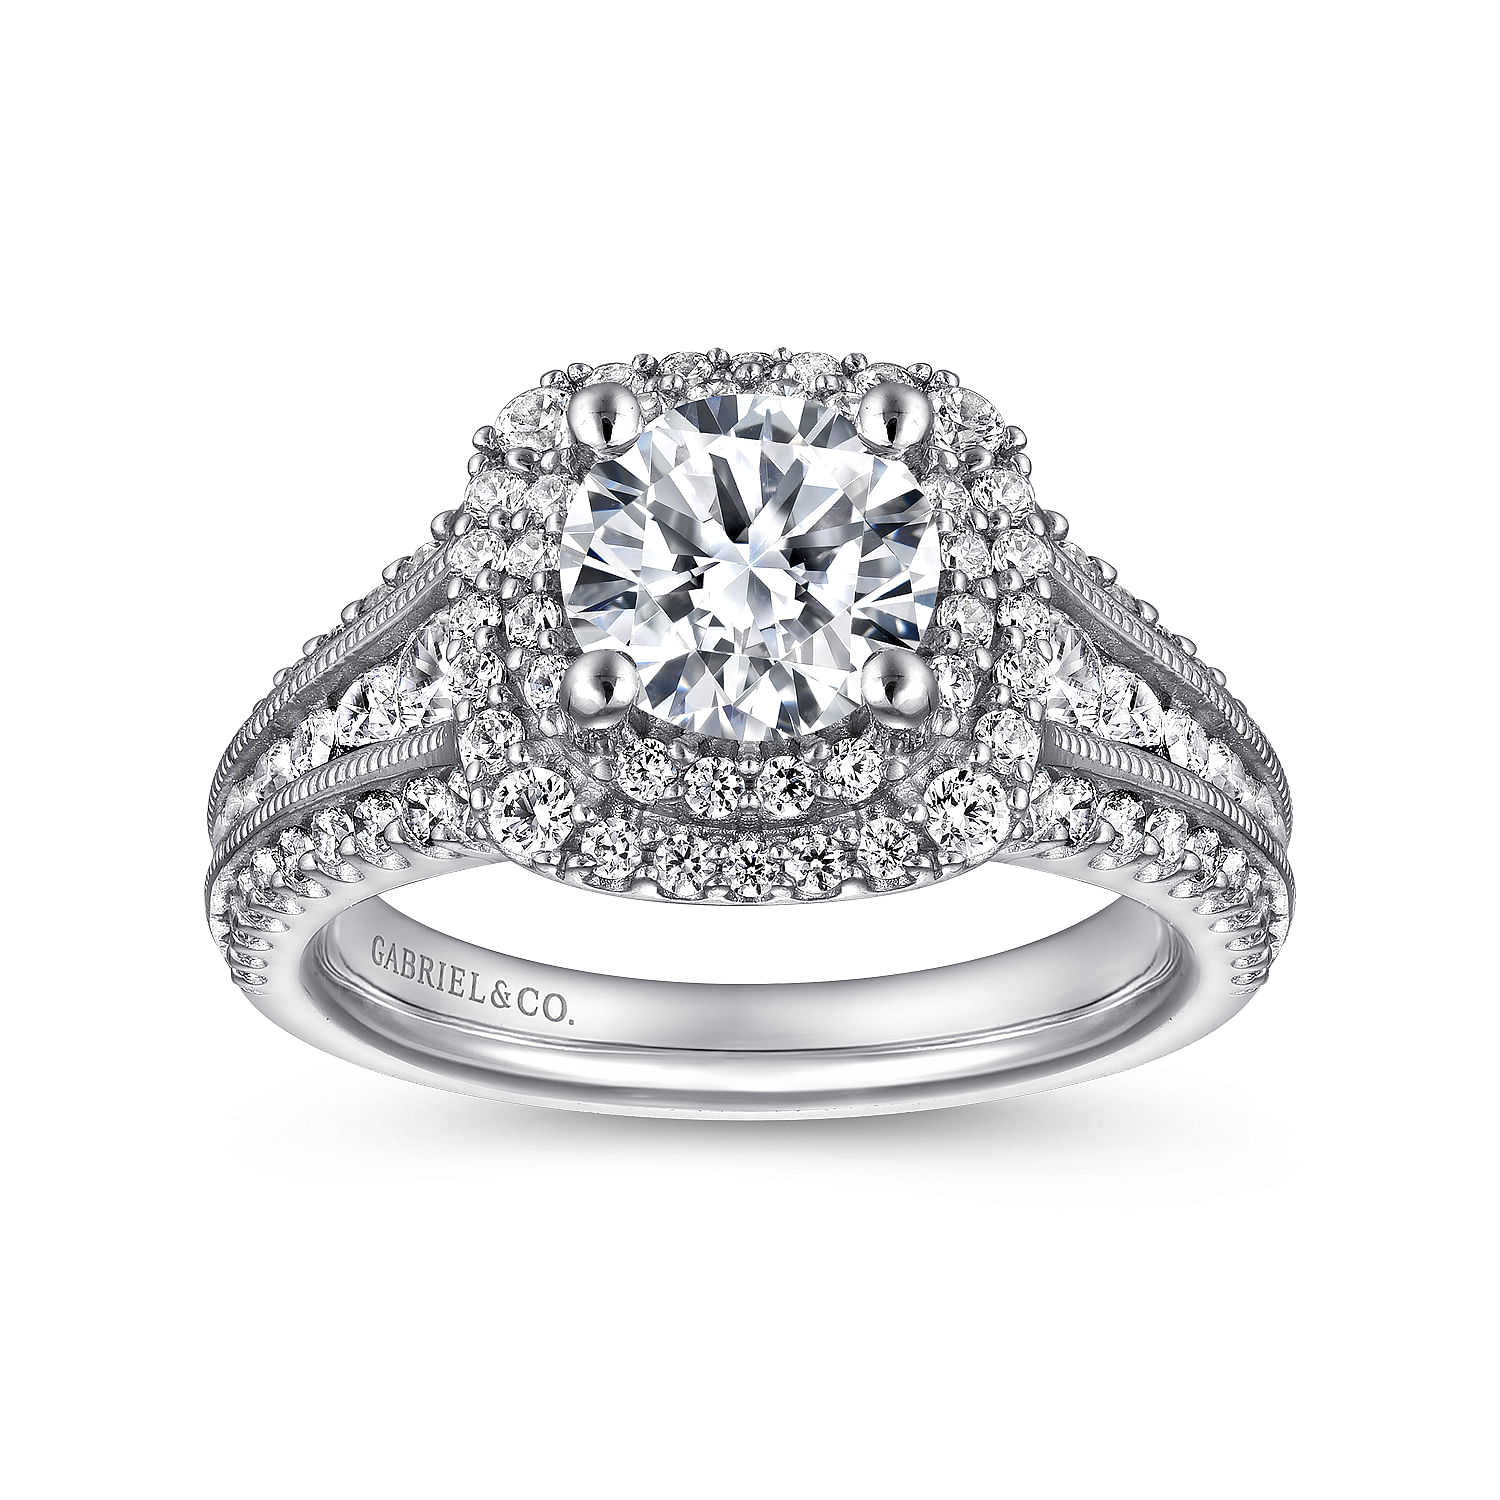 Complete Wedding + Engagement Ring Bundle – B&Co Jewelry